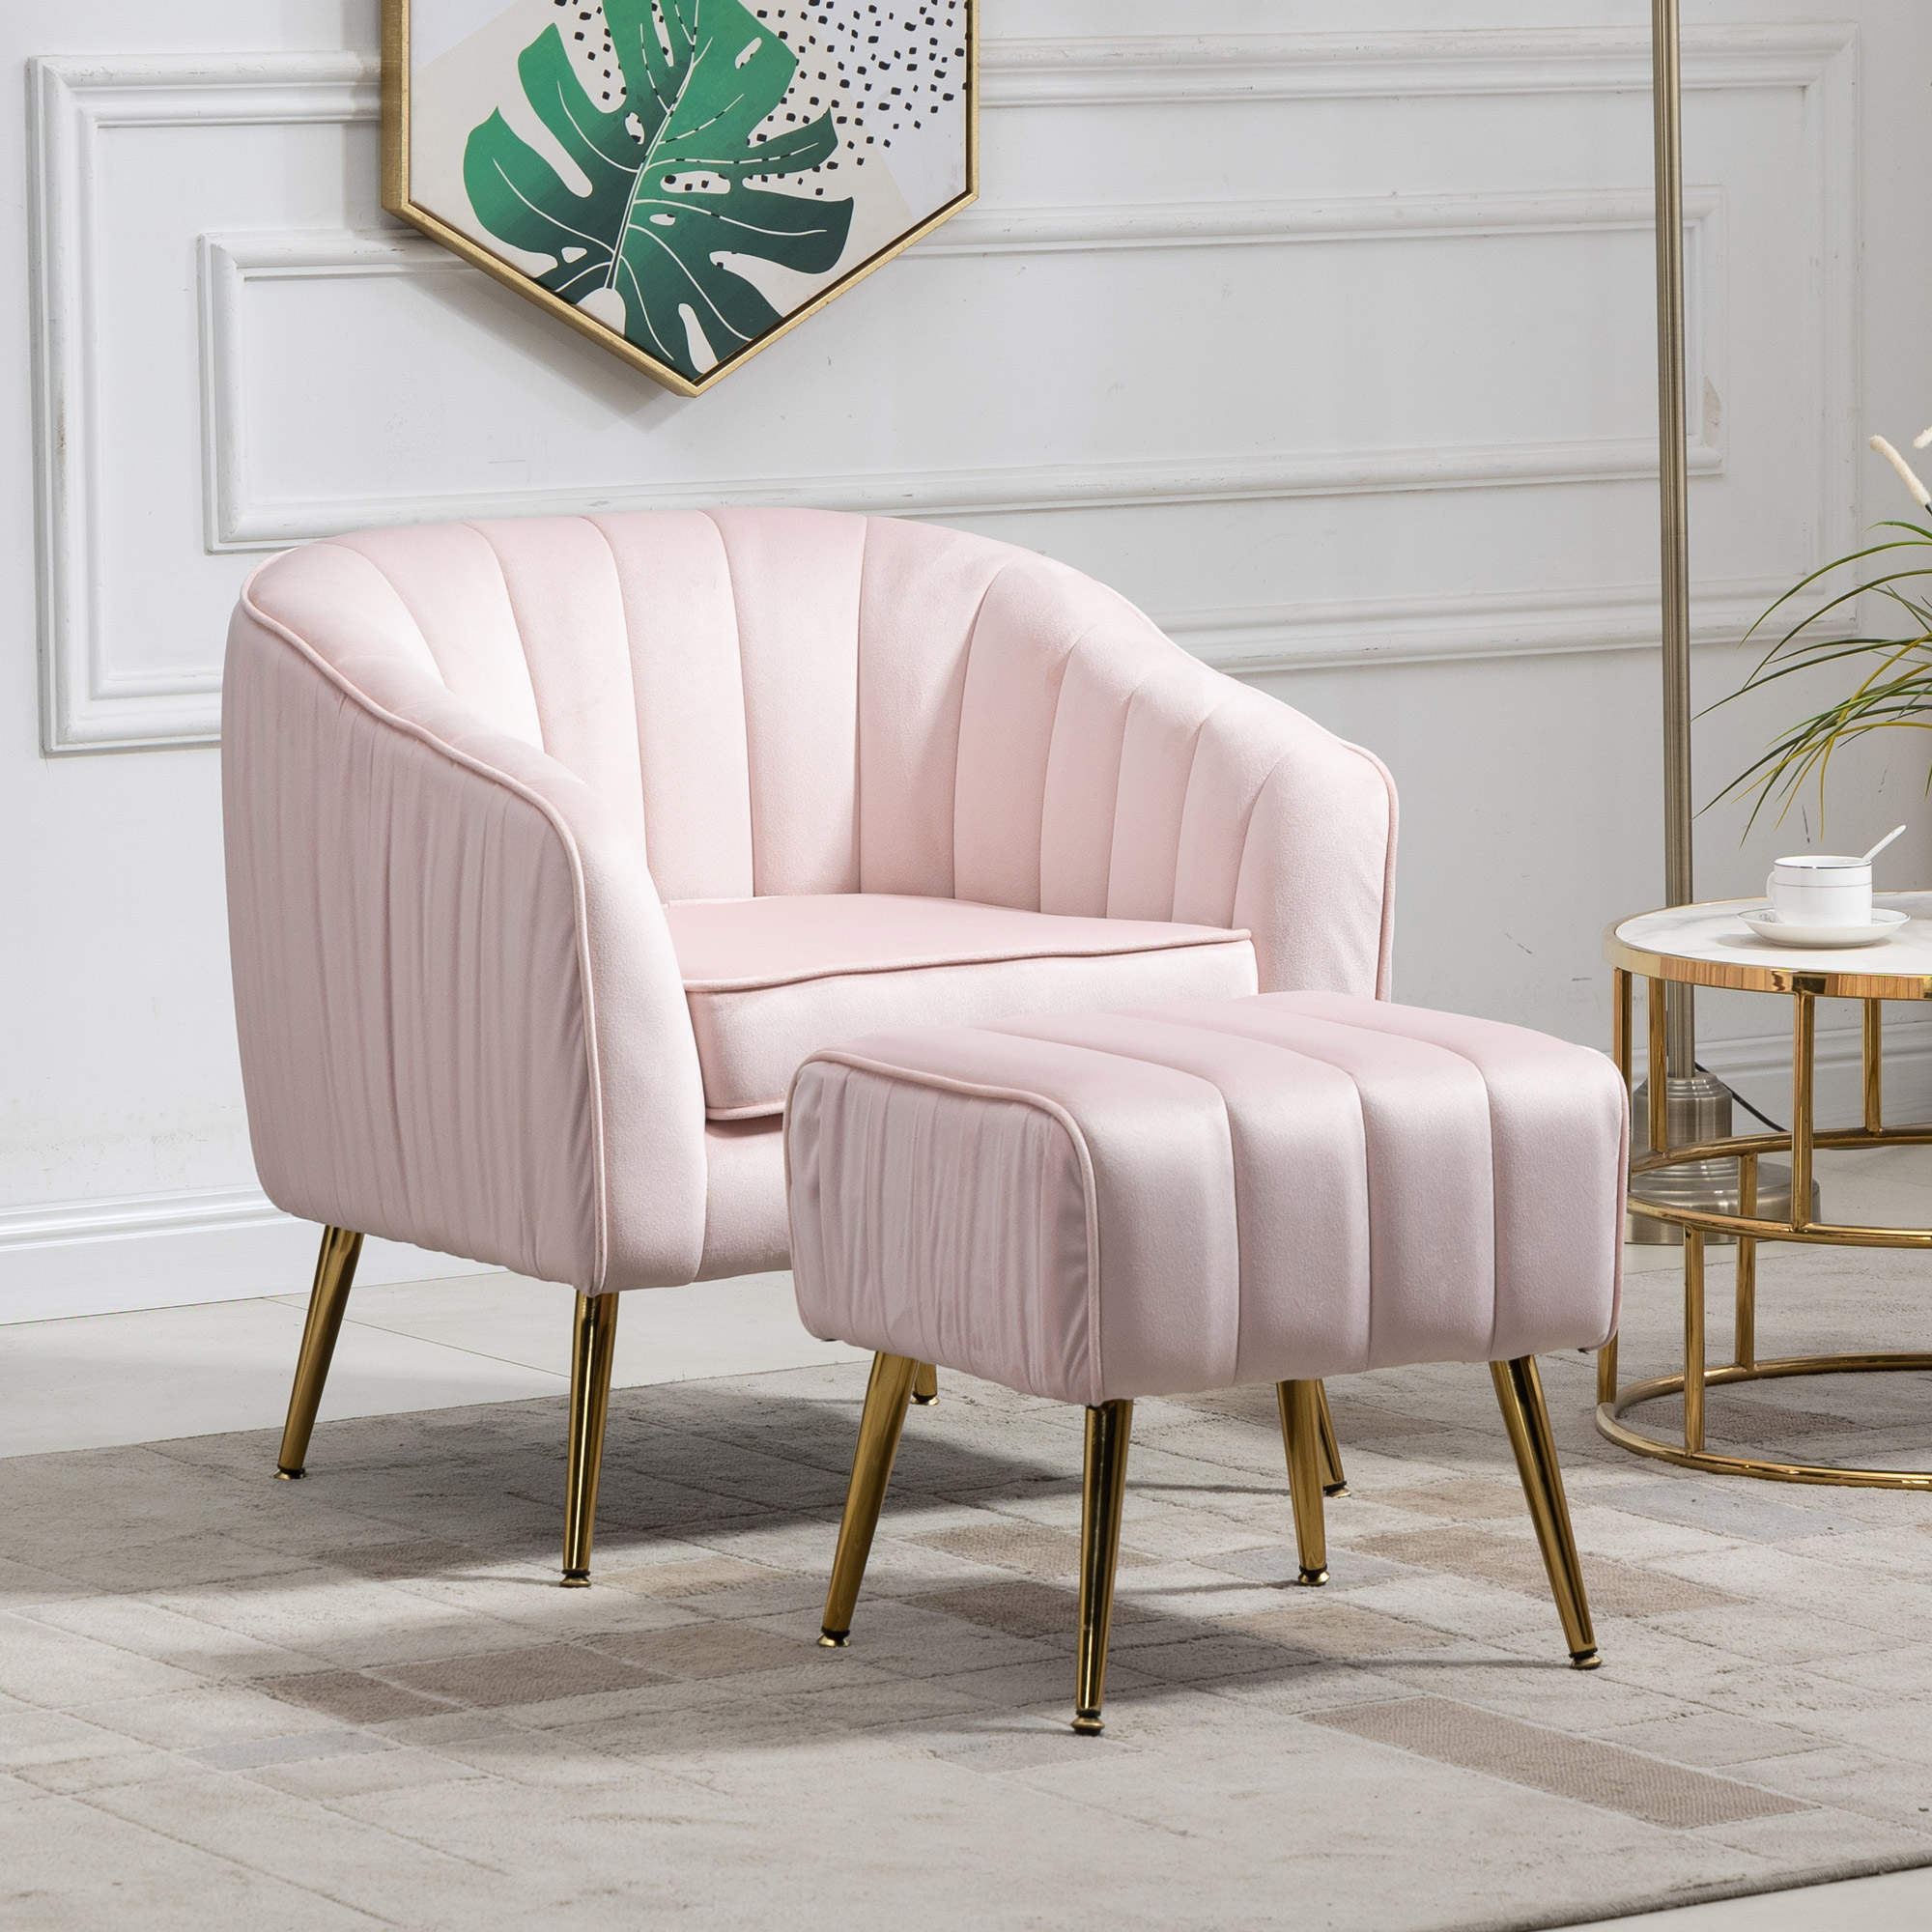 Velvet Accent Chair, Modern Barrel Chair with Ottoman, Arm Pub Chair for Living Room/Bedroom/Nail Salon, Blush Pink, Golden Finished, Suitable for Small Spaces-CASAINC